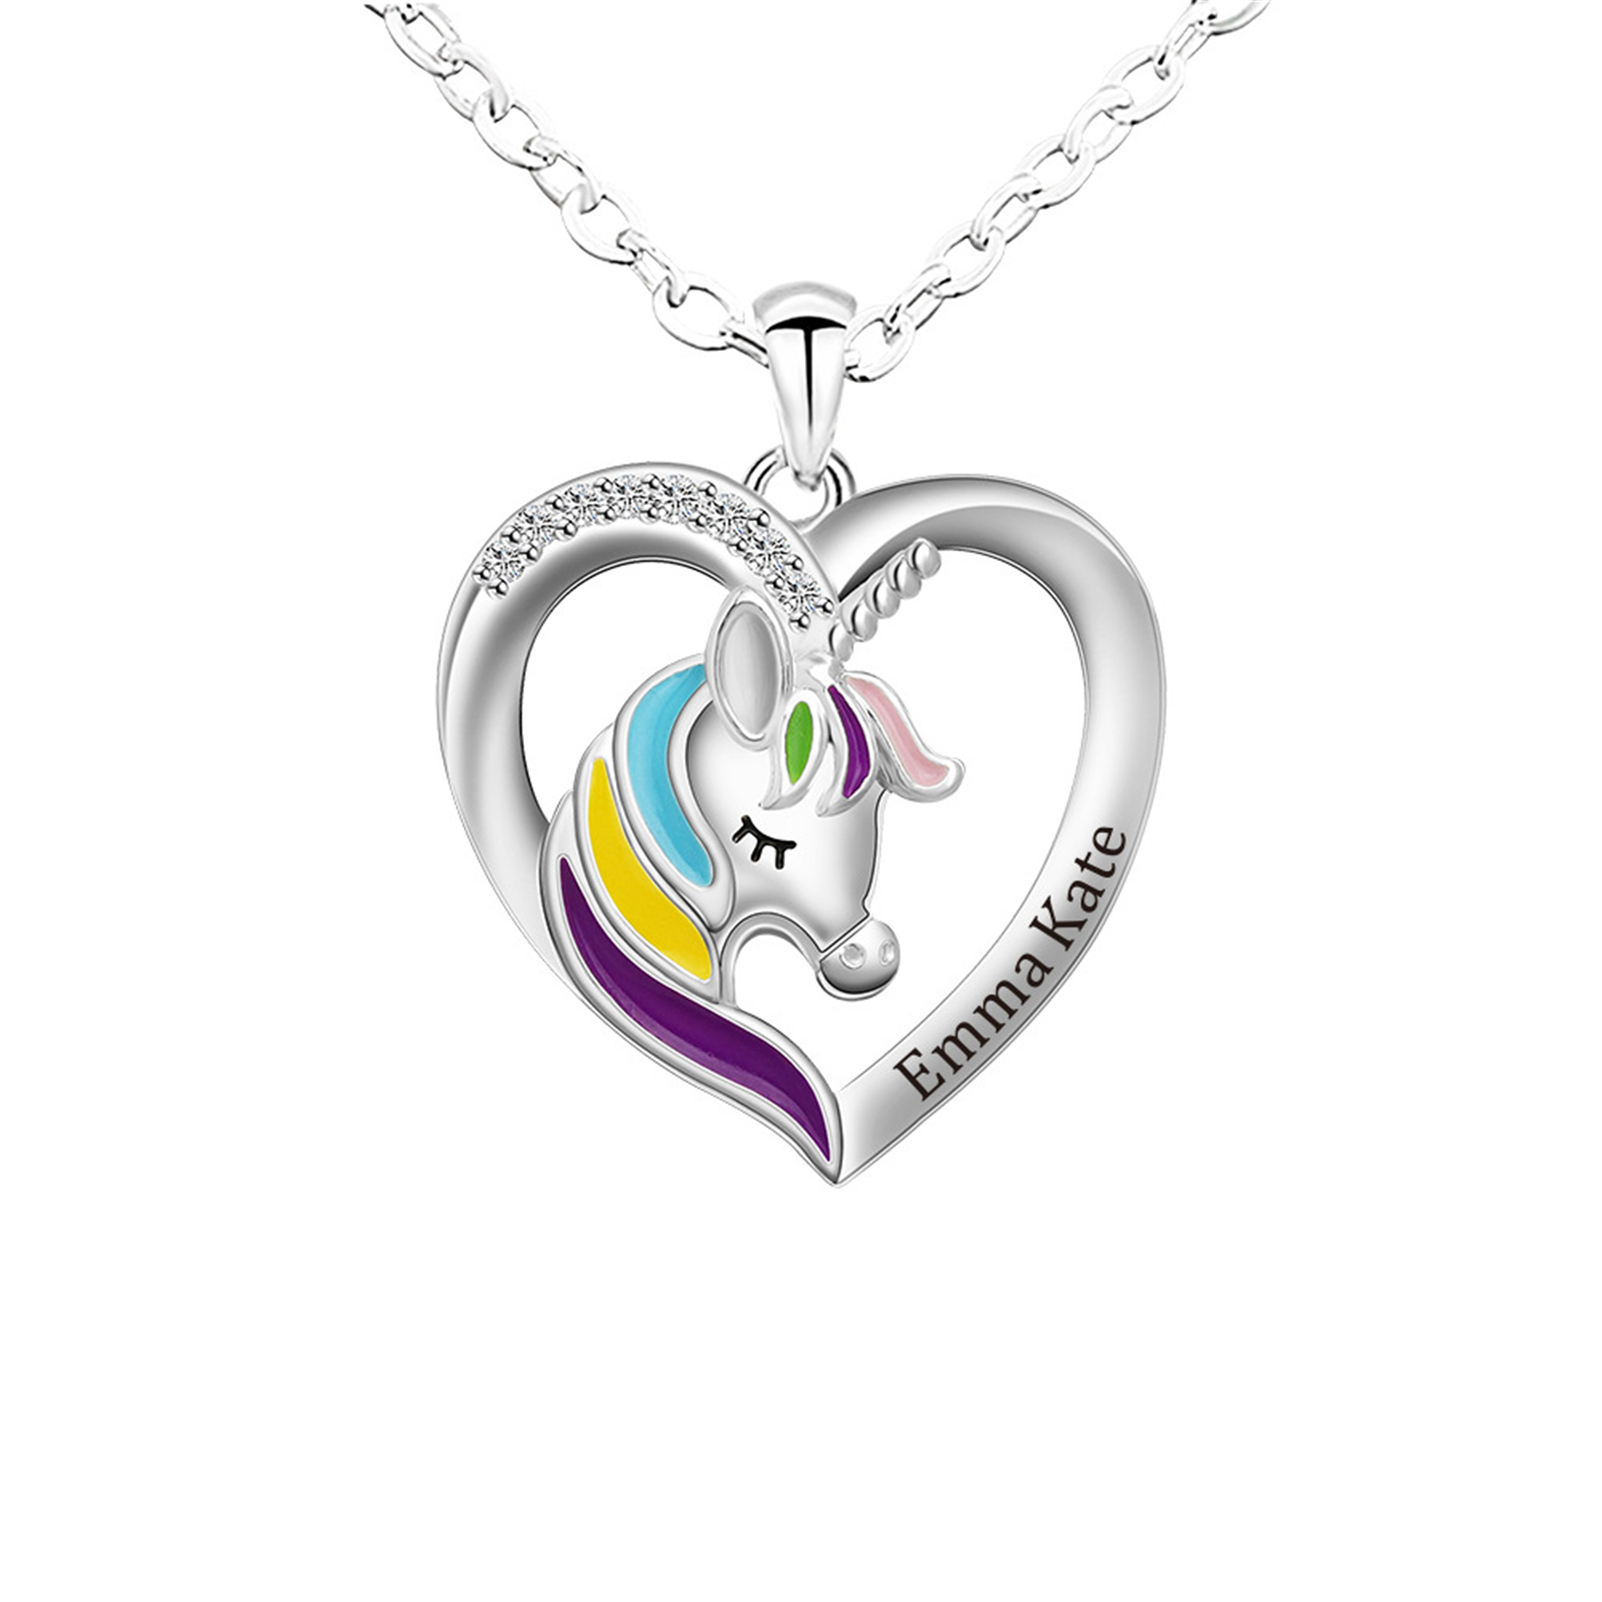 NL1-1 Personalized Unicorn Necklace Engraved Crystal Heart Pendant Necklace